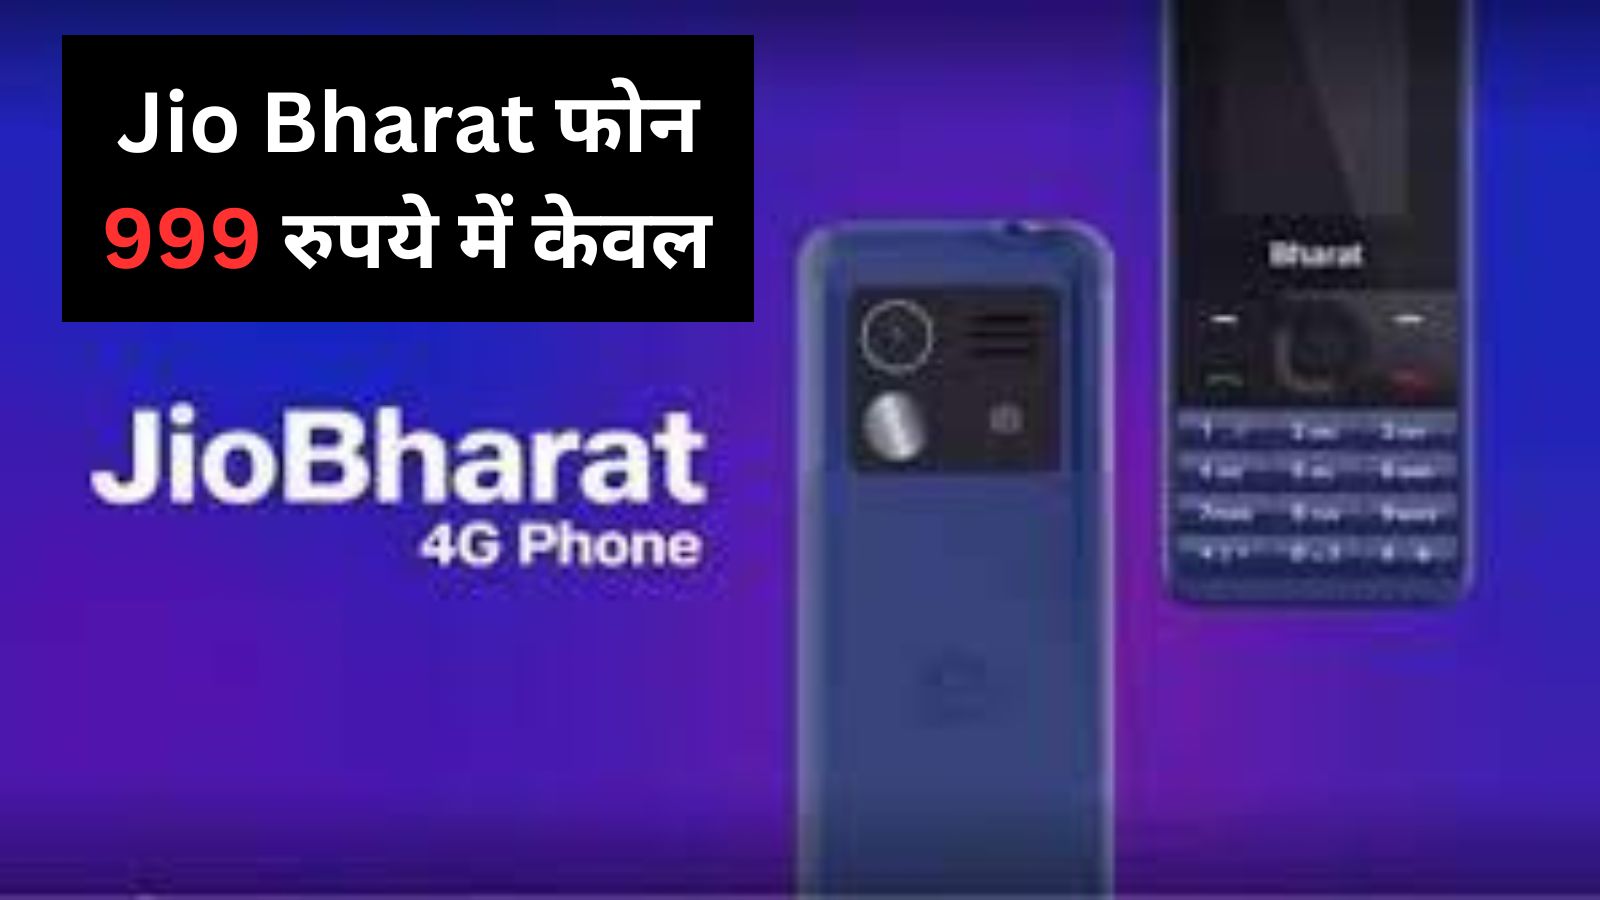 Jio Bharat Phone in Rs 999 only